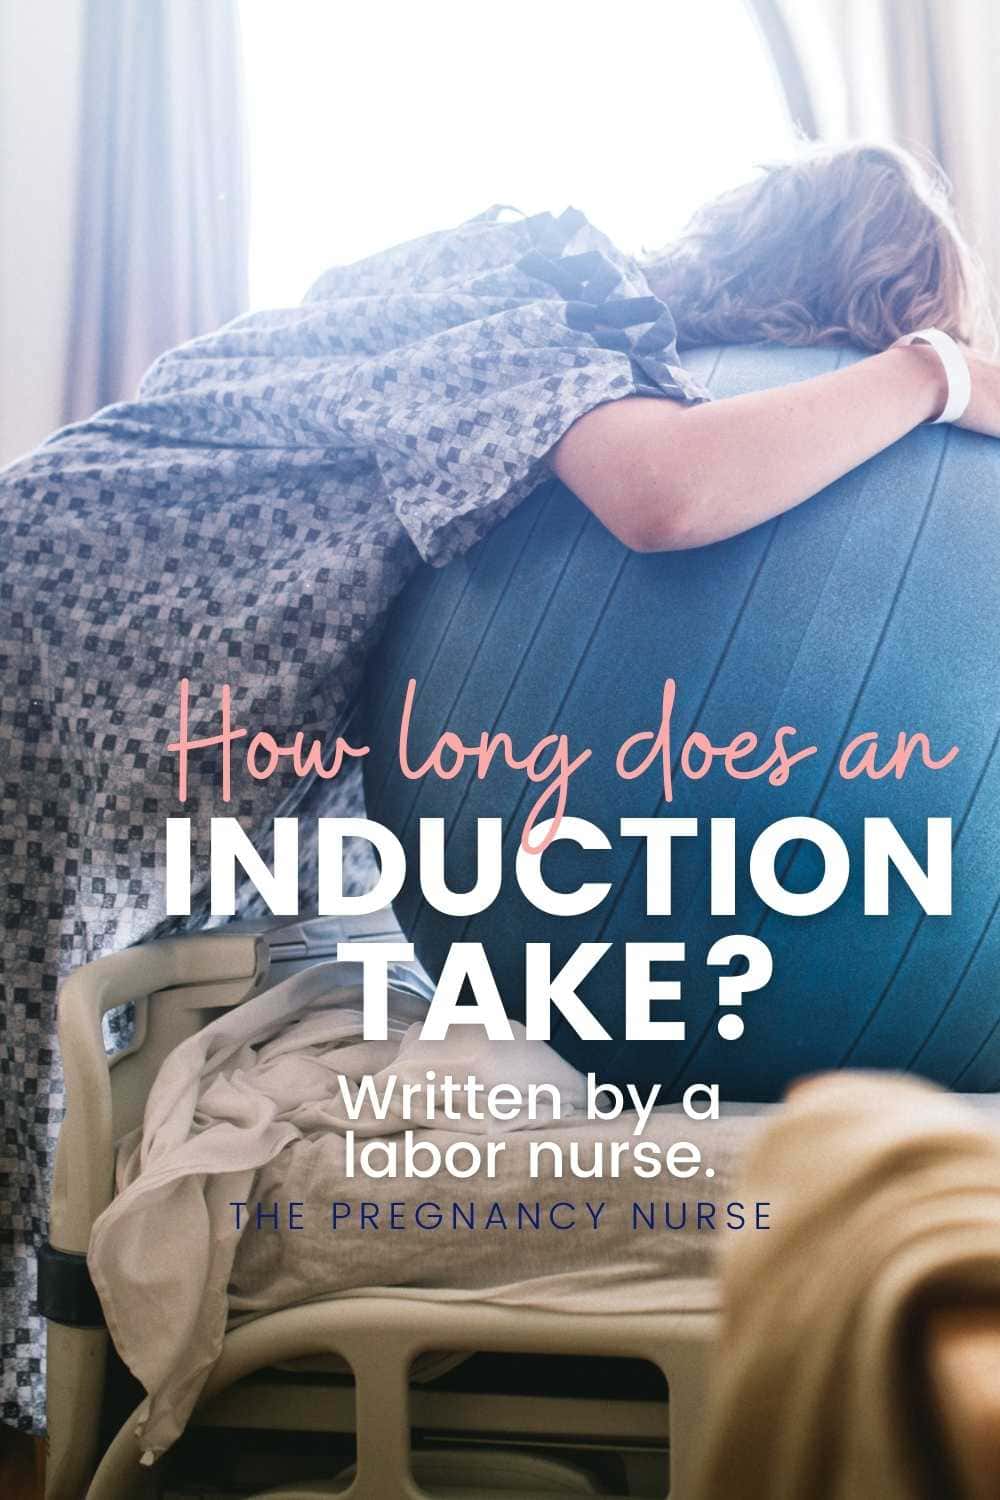 When you initiate a labor induction you might wonder how long until your baby is born? This might be the first thing that pregnant women think about, since many birth stories talk about labor taking a long time, so let’s talk about how long after your induction process starts will your baby be born at the end of pregnancy. via @pullingcurls